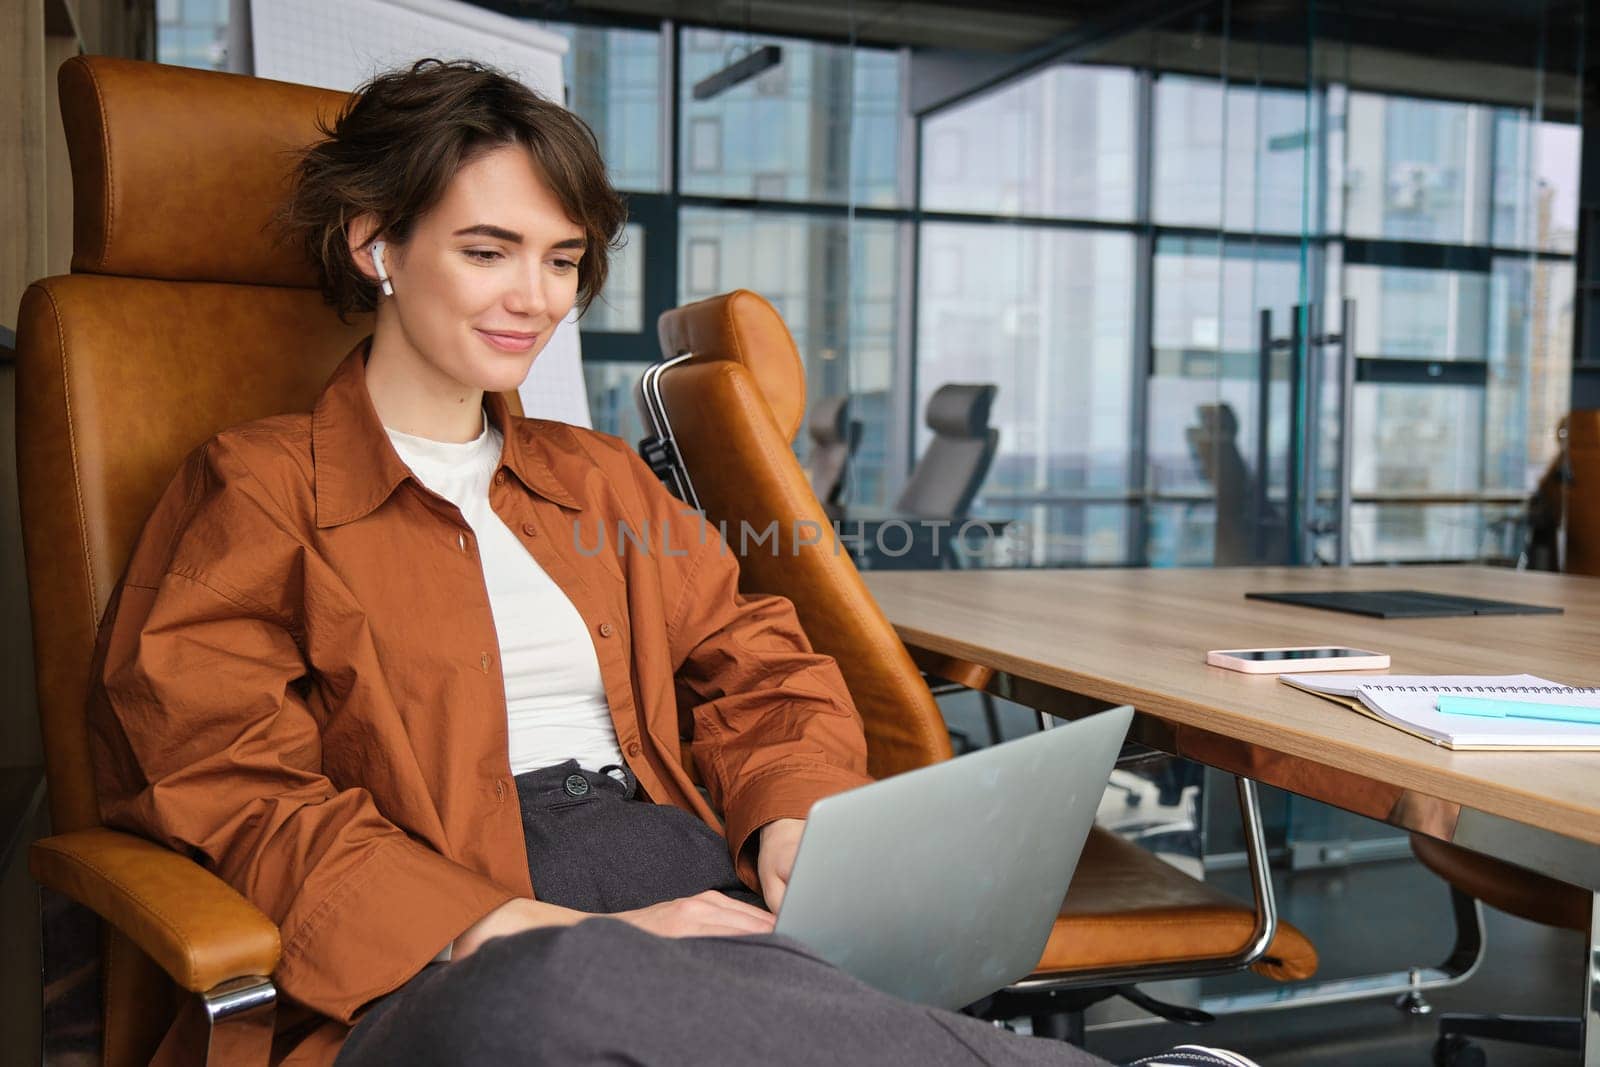 Portrait of smiling young woman, manager works in office, uses laptop, works from co-working space.